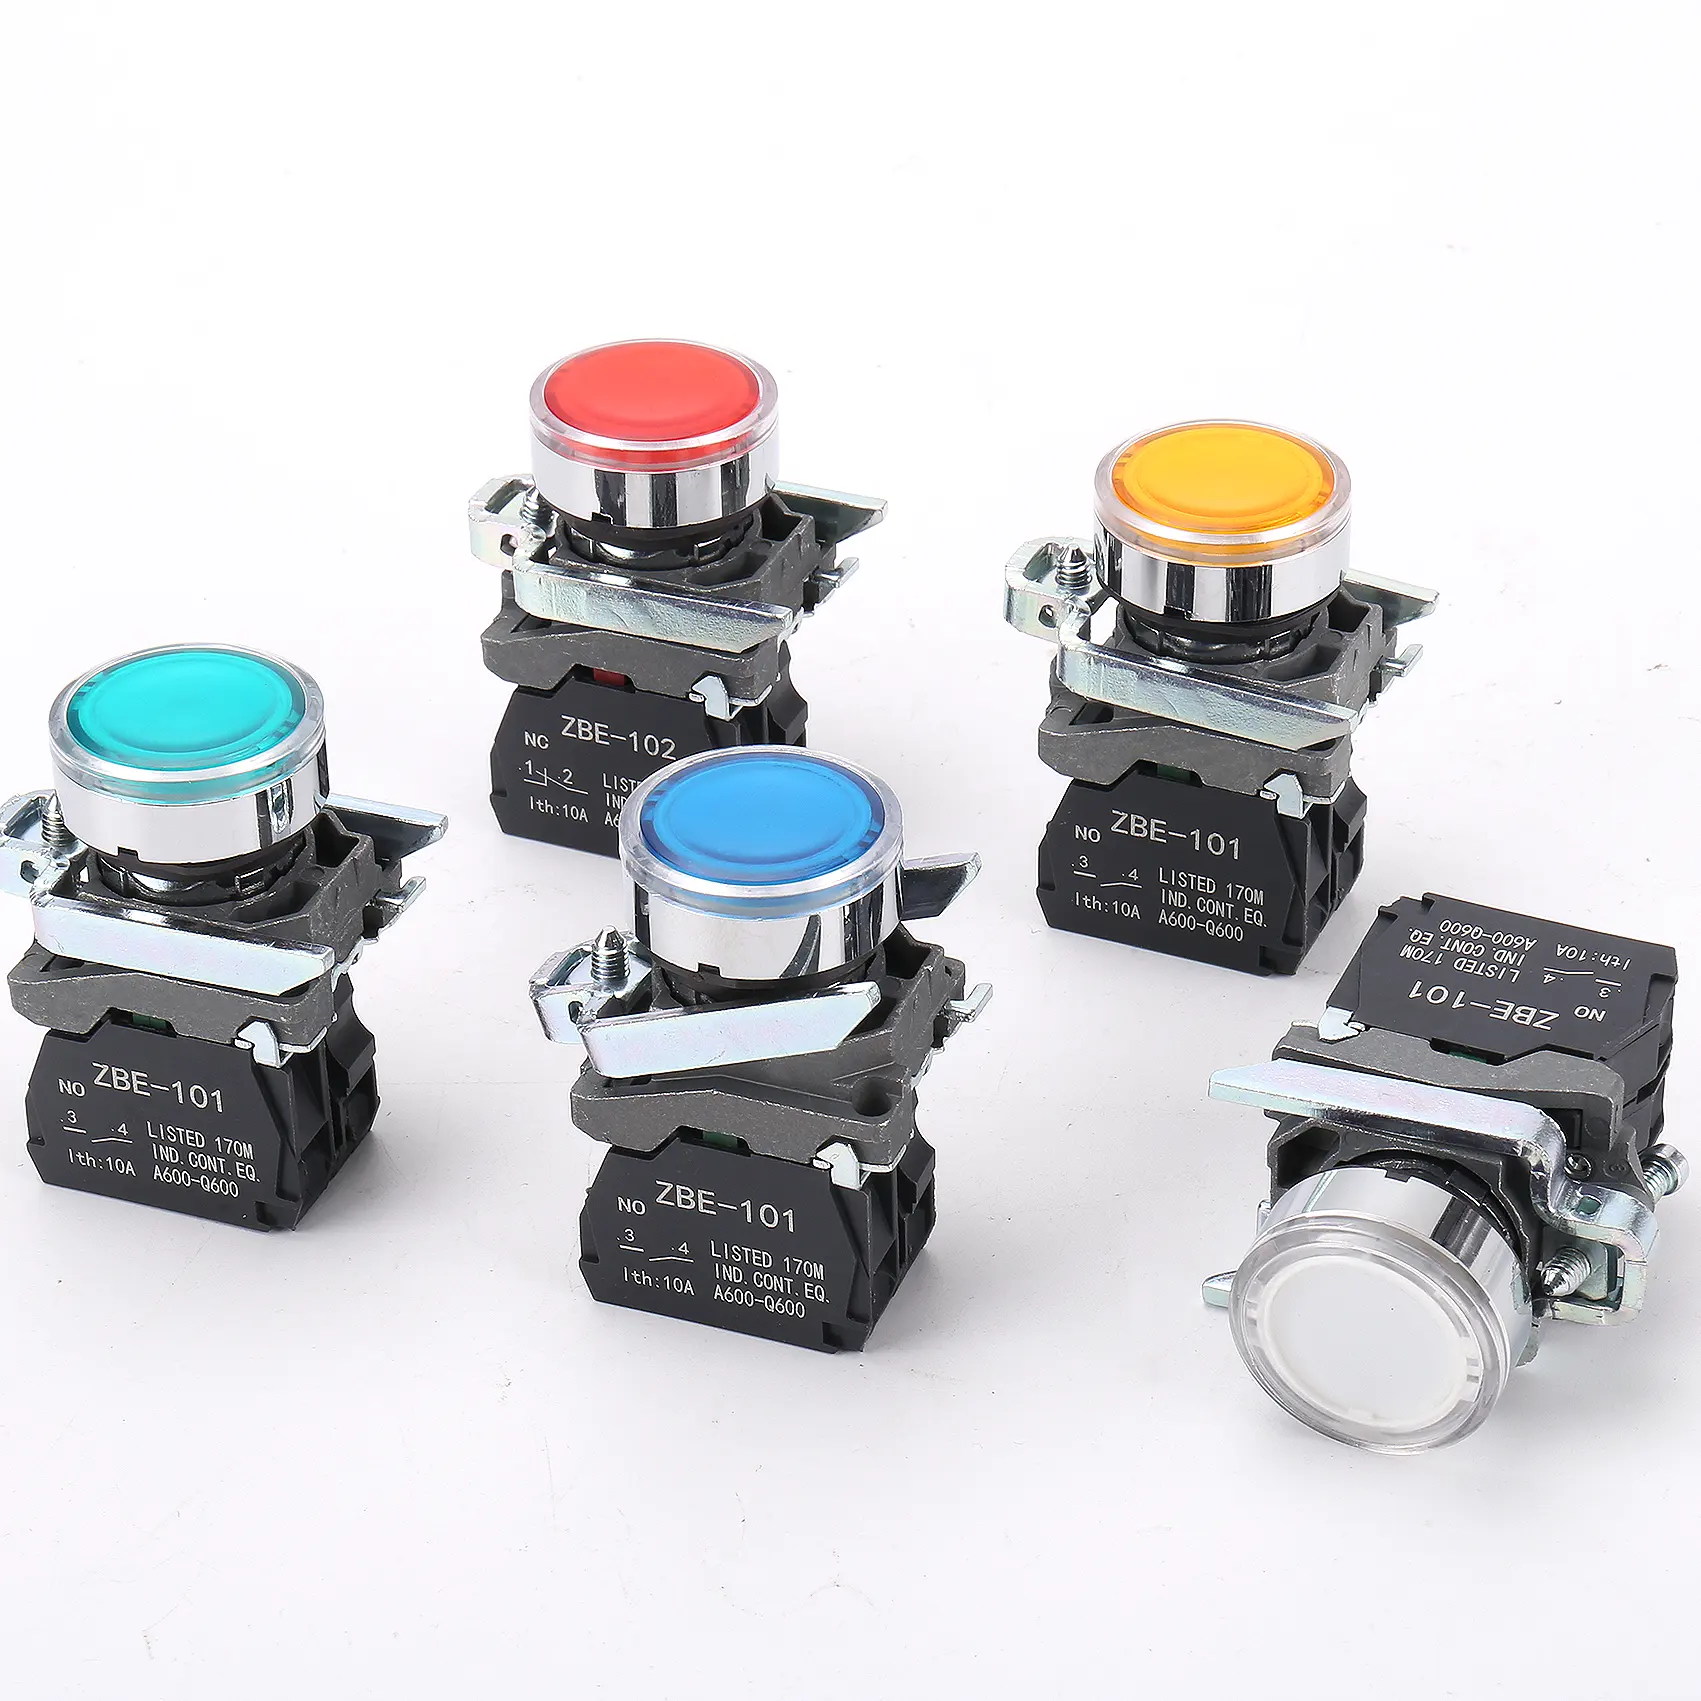 Industrial XB4 22mm LED latching push button switch with lamp NO NC flat rotary momentary metal push button switches with light